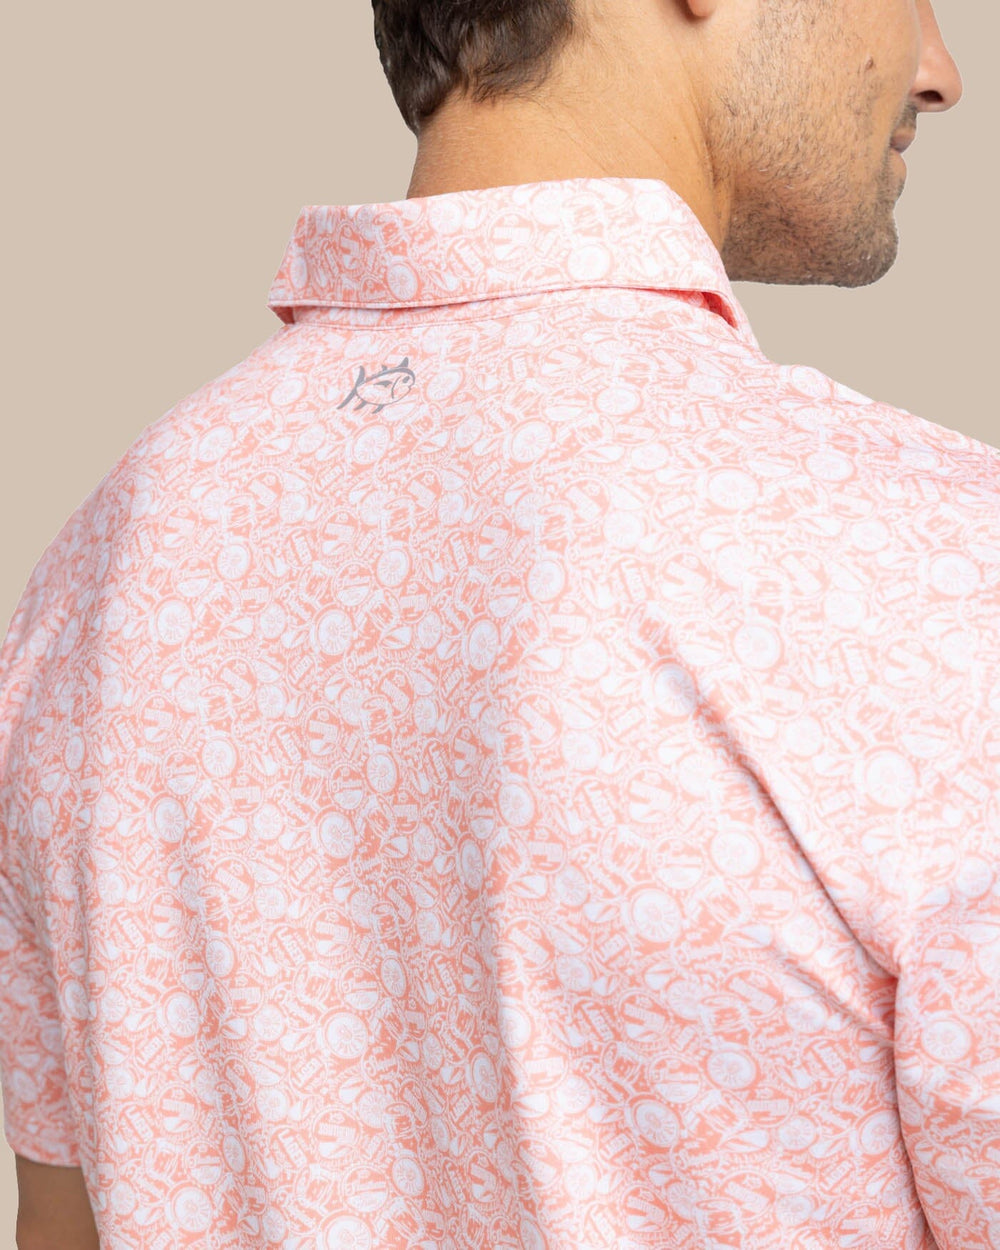 The detail view of the Southern Tide Driver Caps Off Printed Polo by Southern Tide - Desert Flower Coral